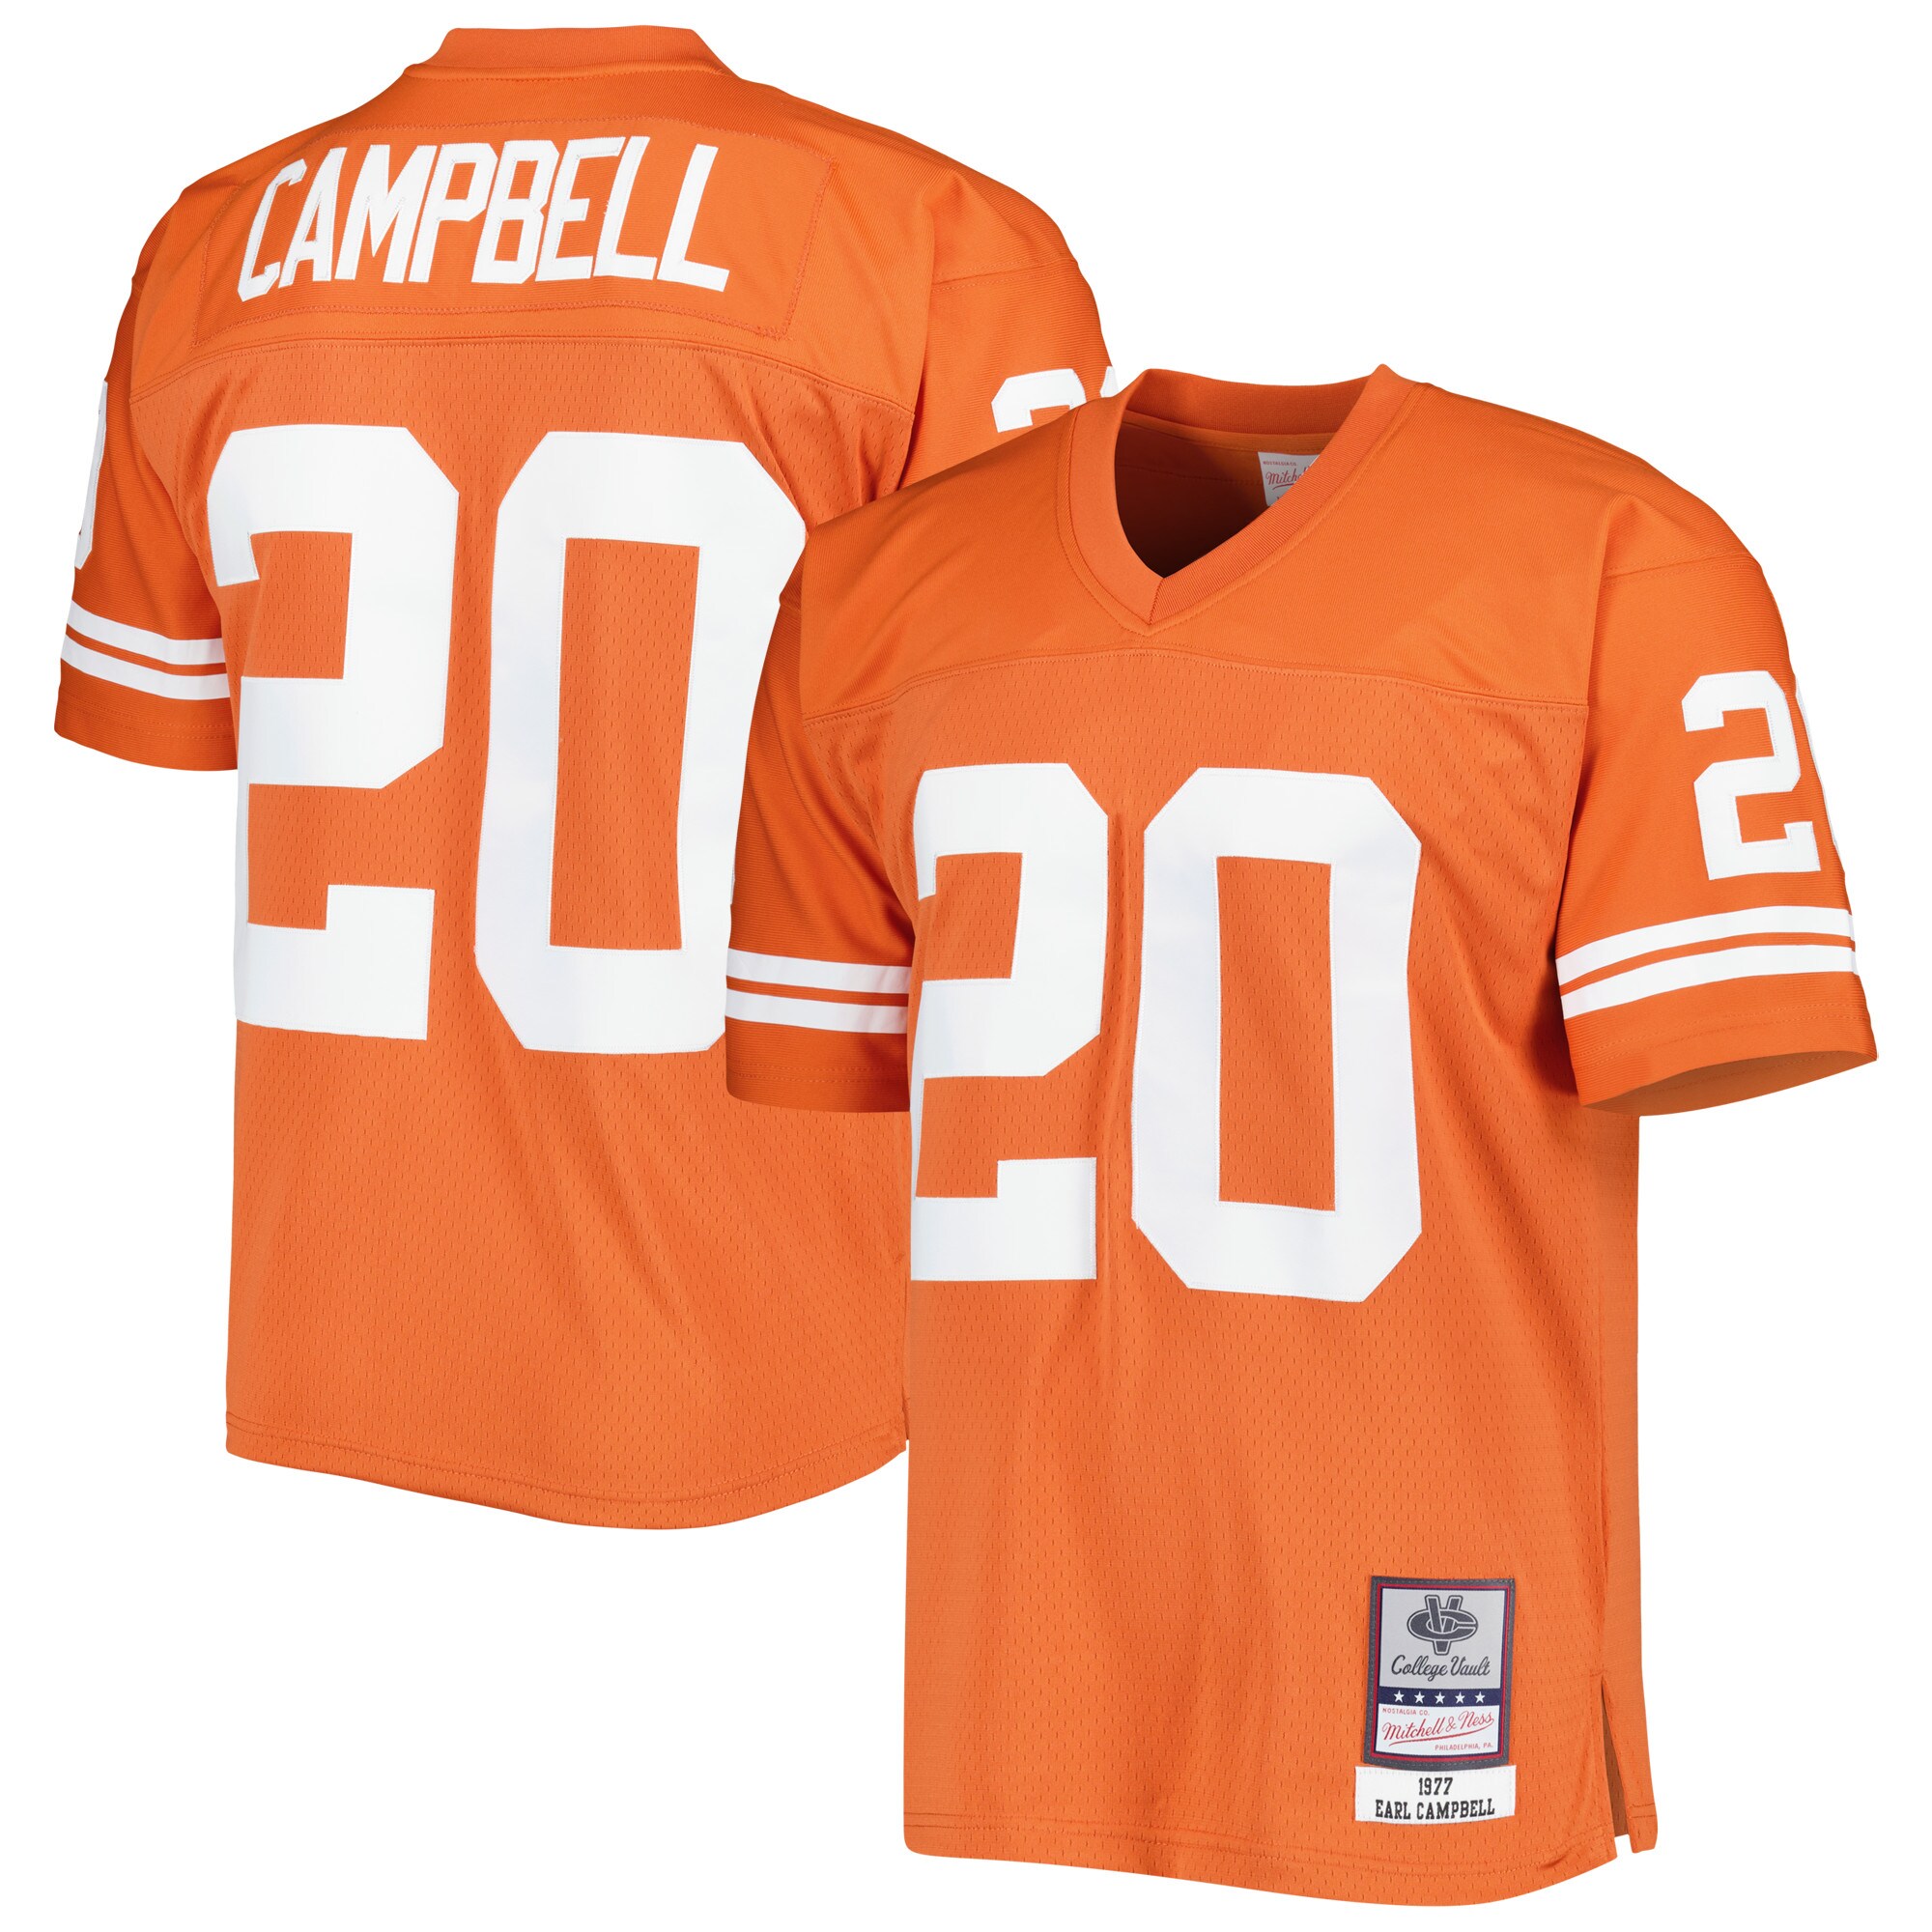 Earl Campbell Texas Longhorns Mitchell & Ness Authentic Jersey - Texas Orange For Youth Women Men